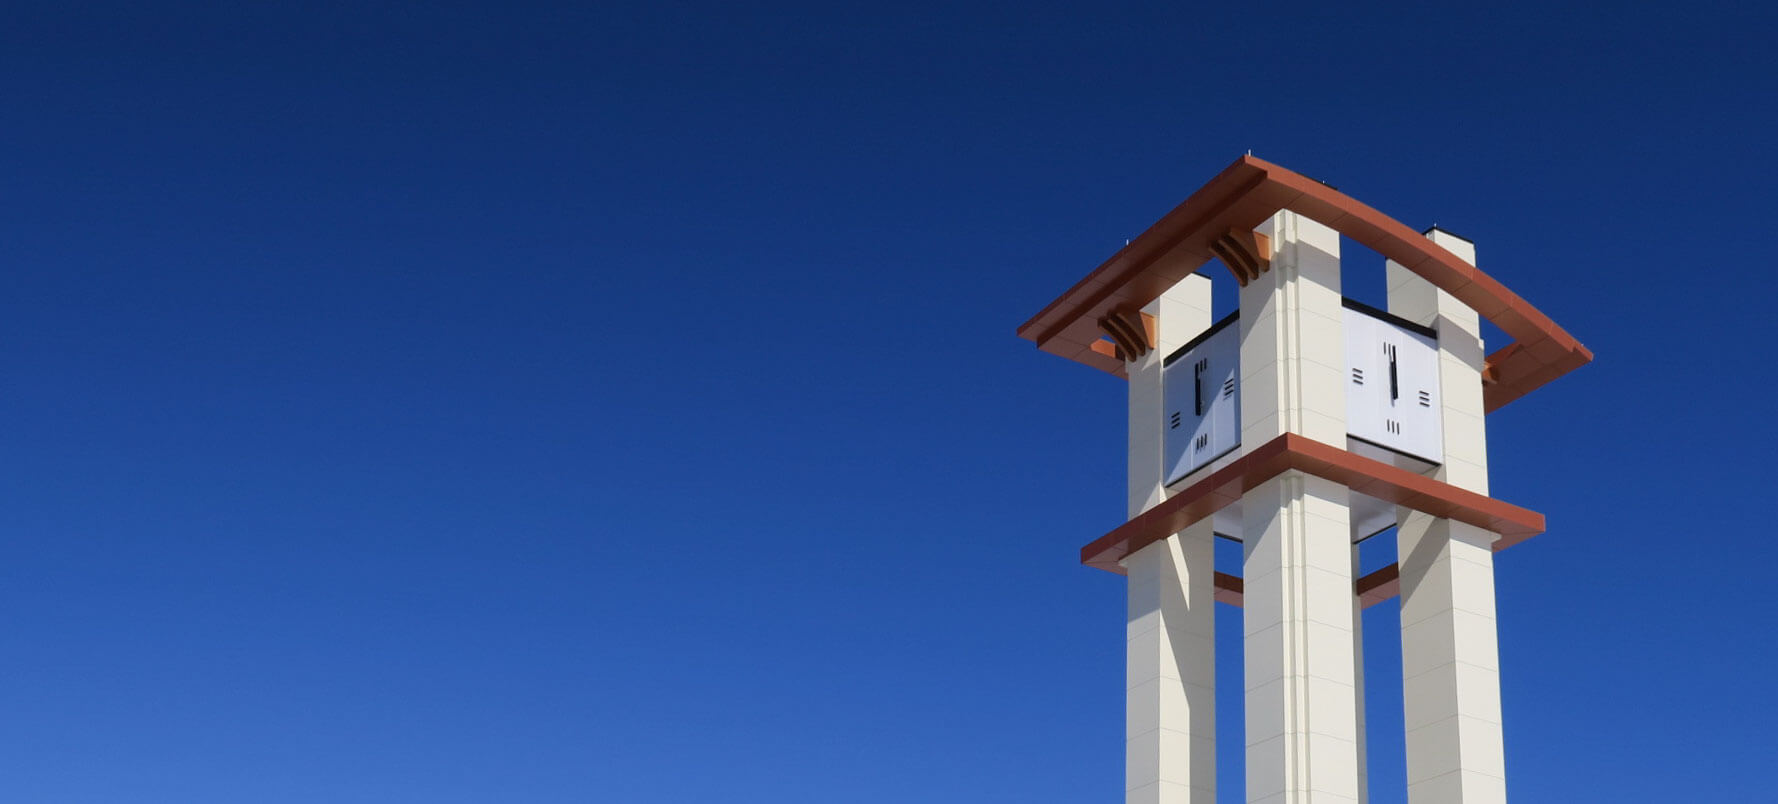 4 sided clock tower at Aurora Highlands new development, blue sky background with 80’ tall open-work white stone with red roofing trim tower with 4 skeletal-type illuminated commercial clocks